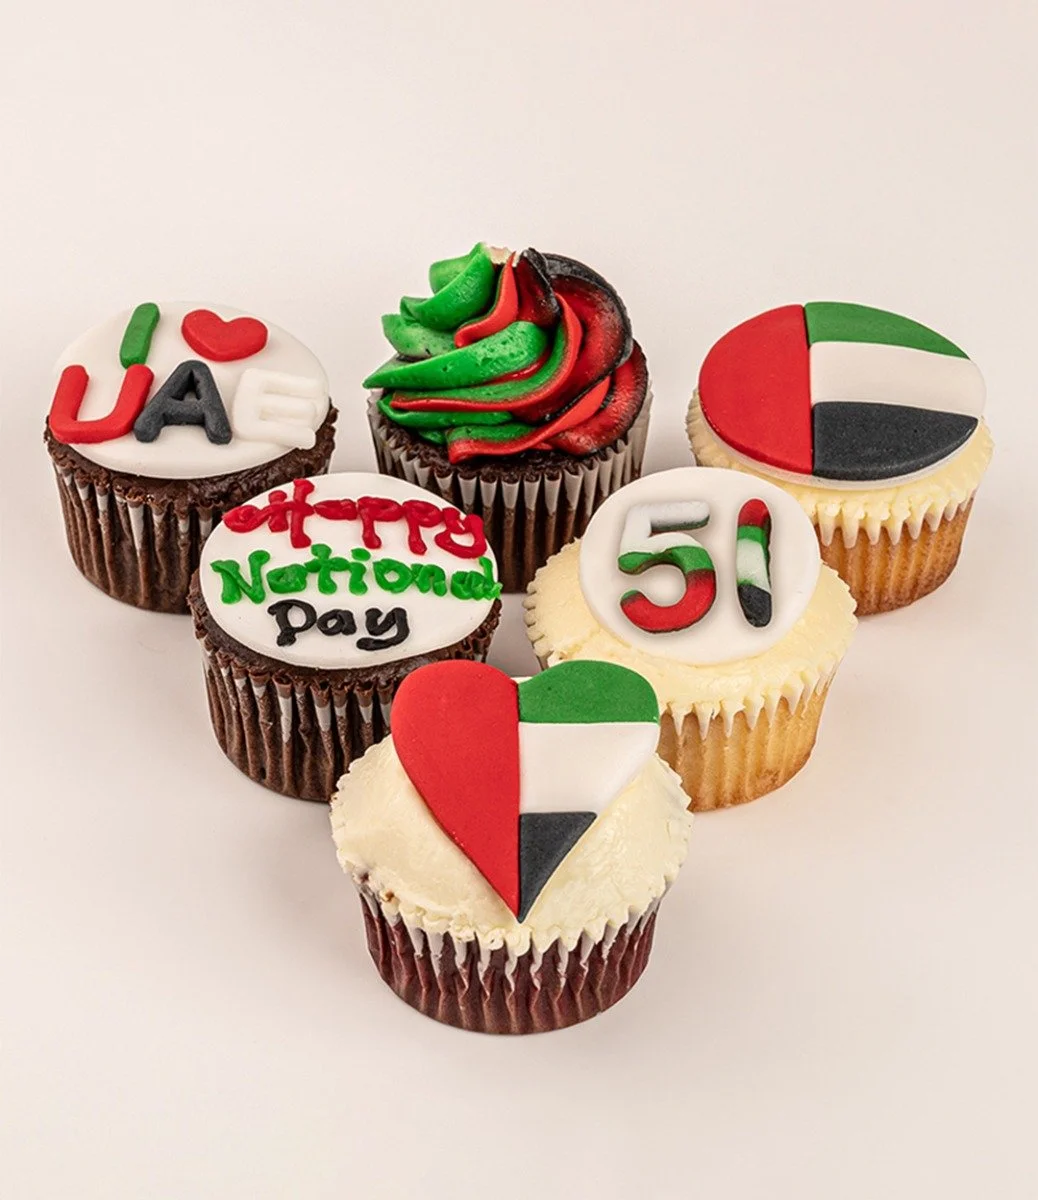 UAE National Day Box of 6 Cupcakes by Hummingbird Bakery